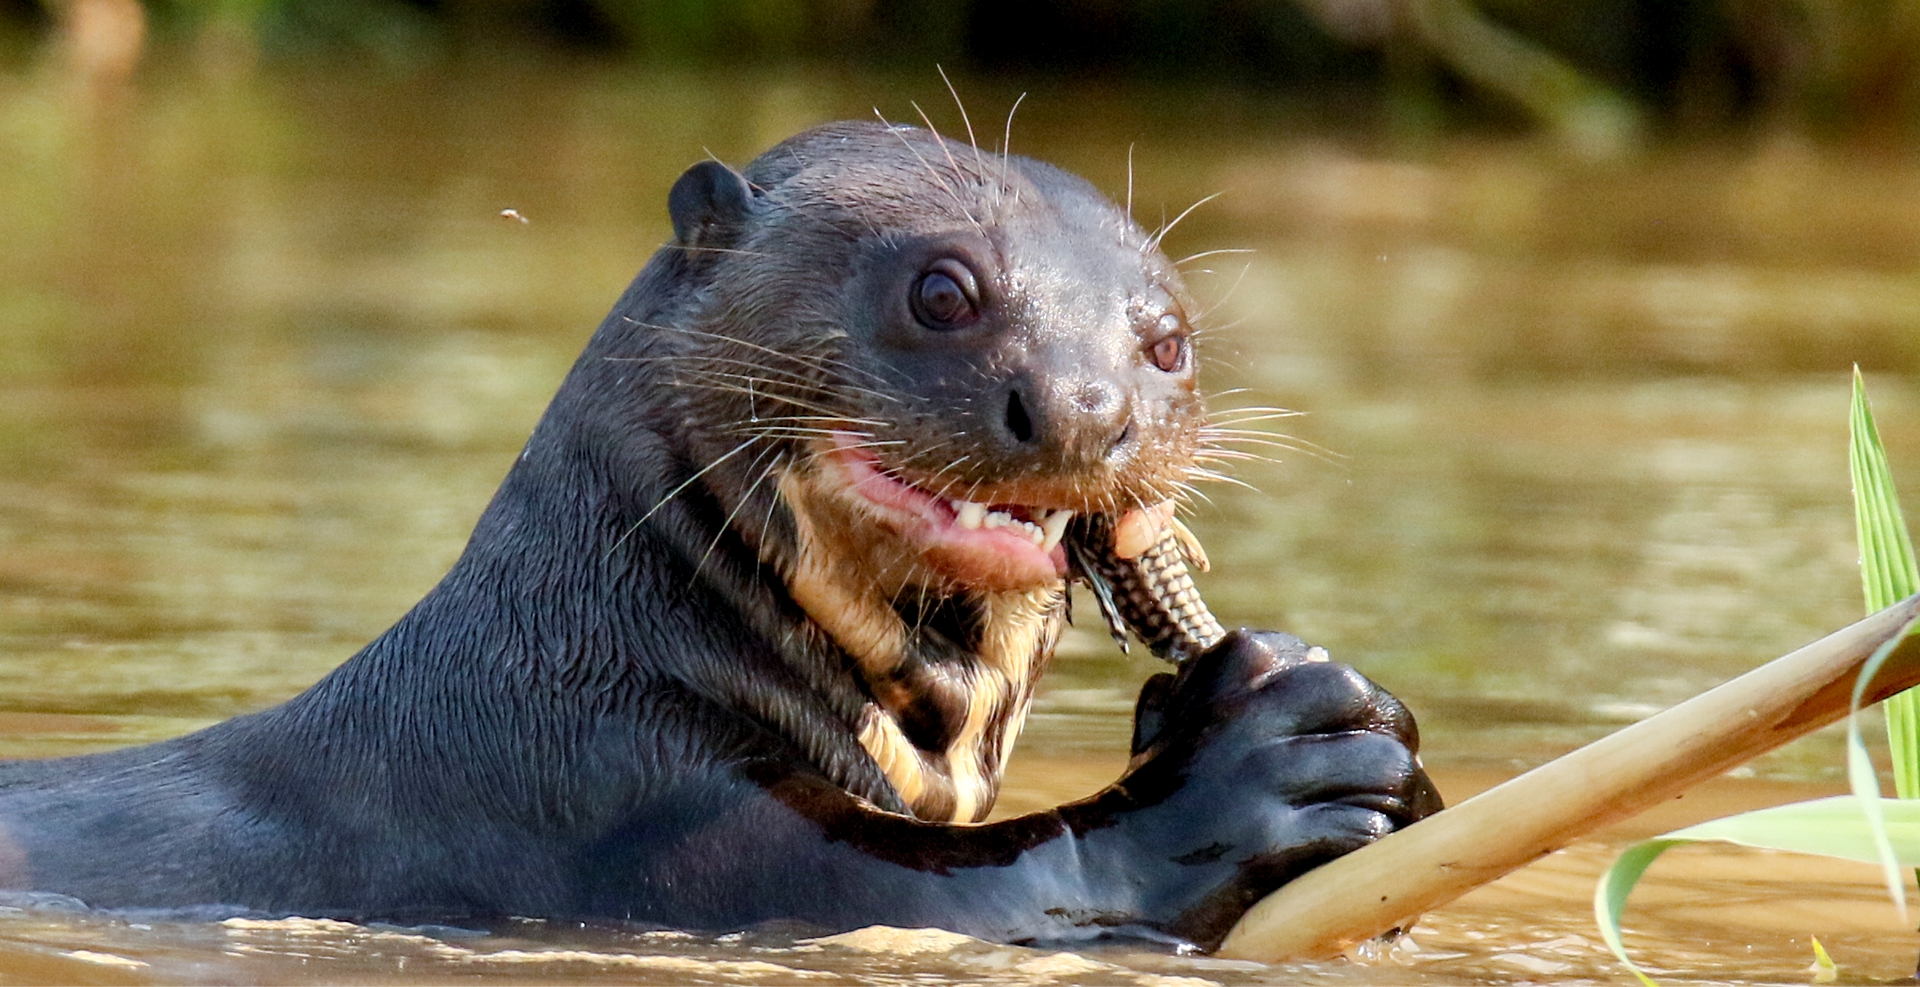 Giant Otter - Pteronura brasiliensis - Mammals of Colombia